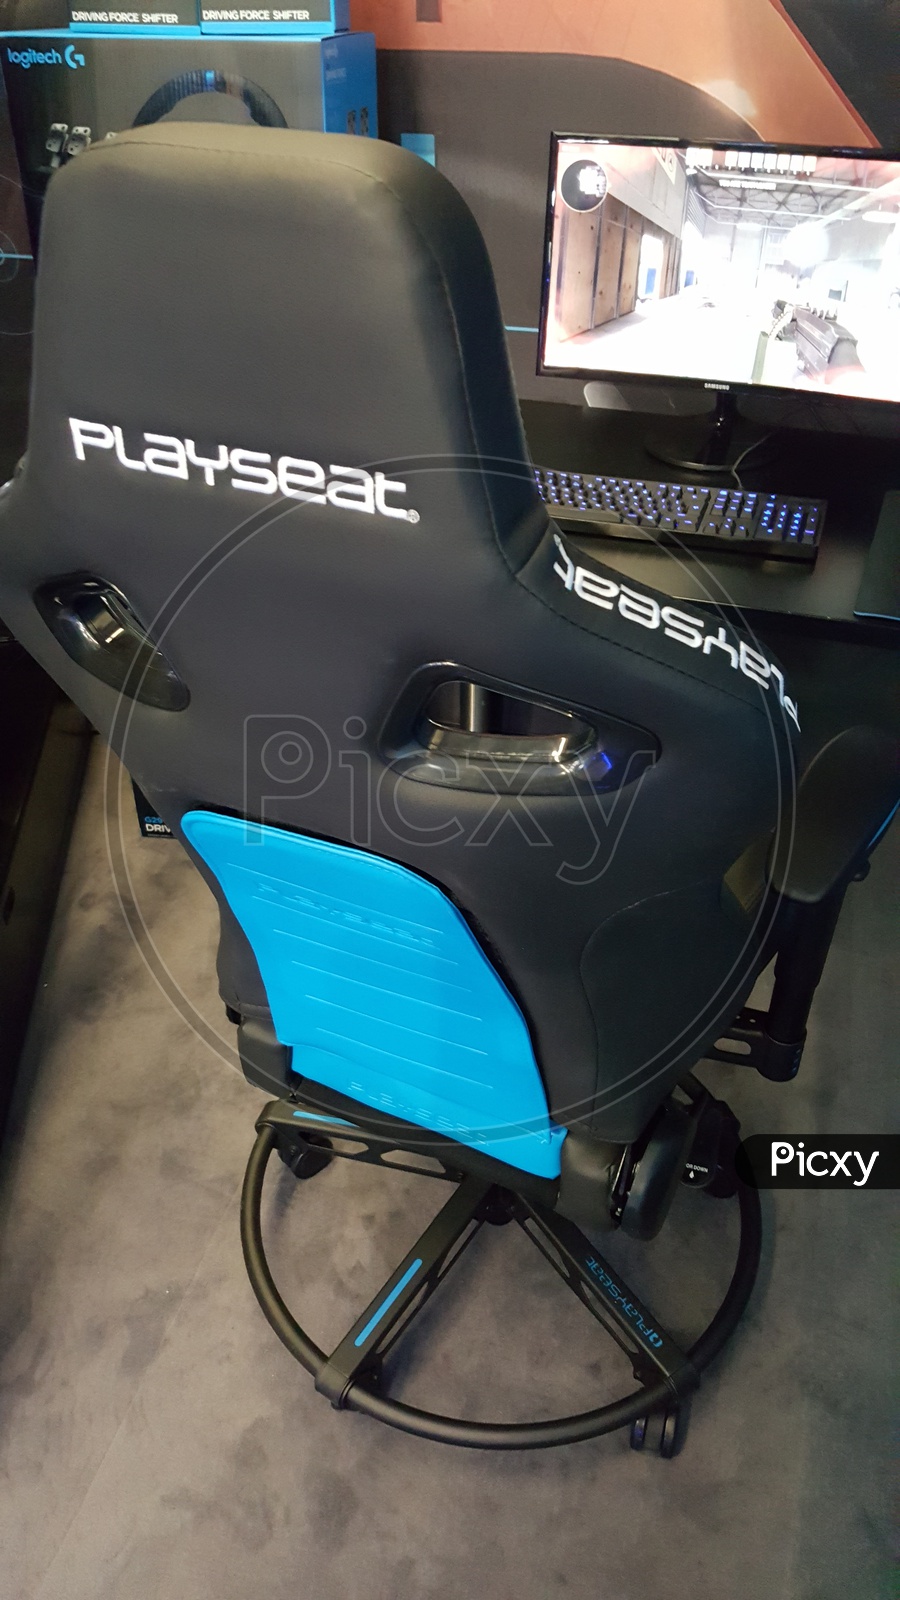 Playseat gaming chair for Gamer's